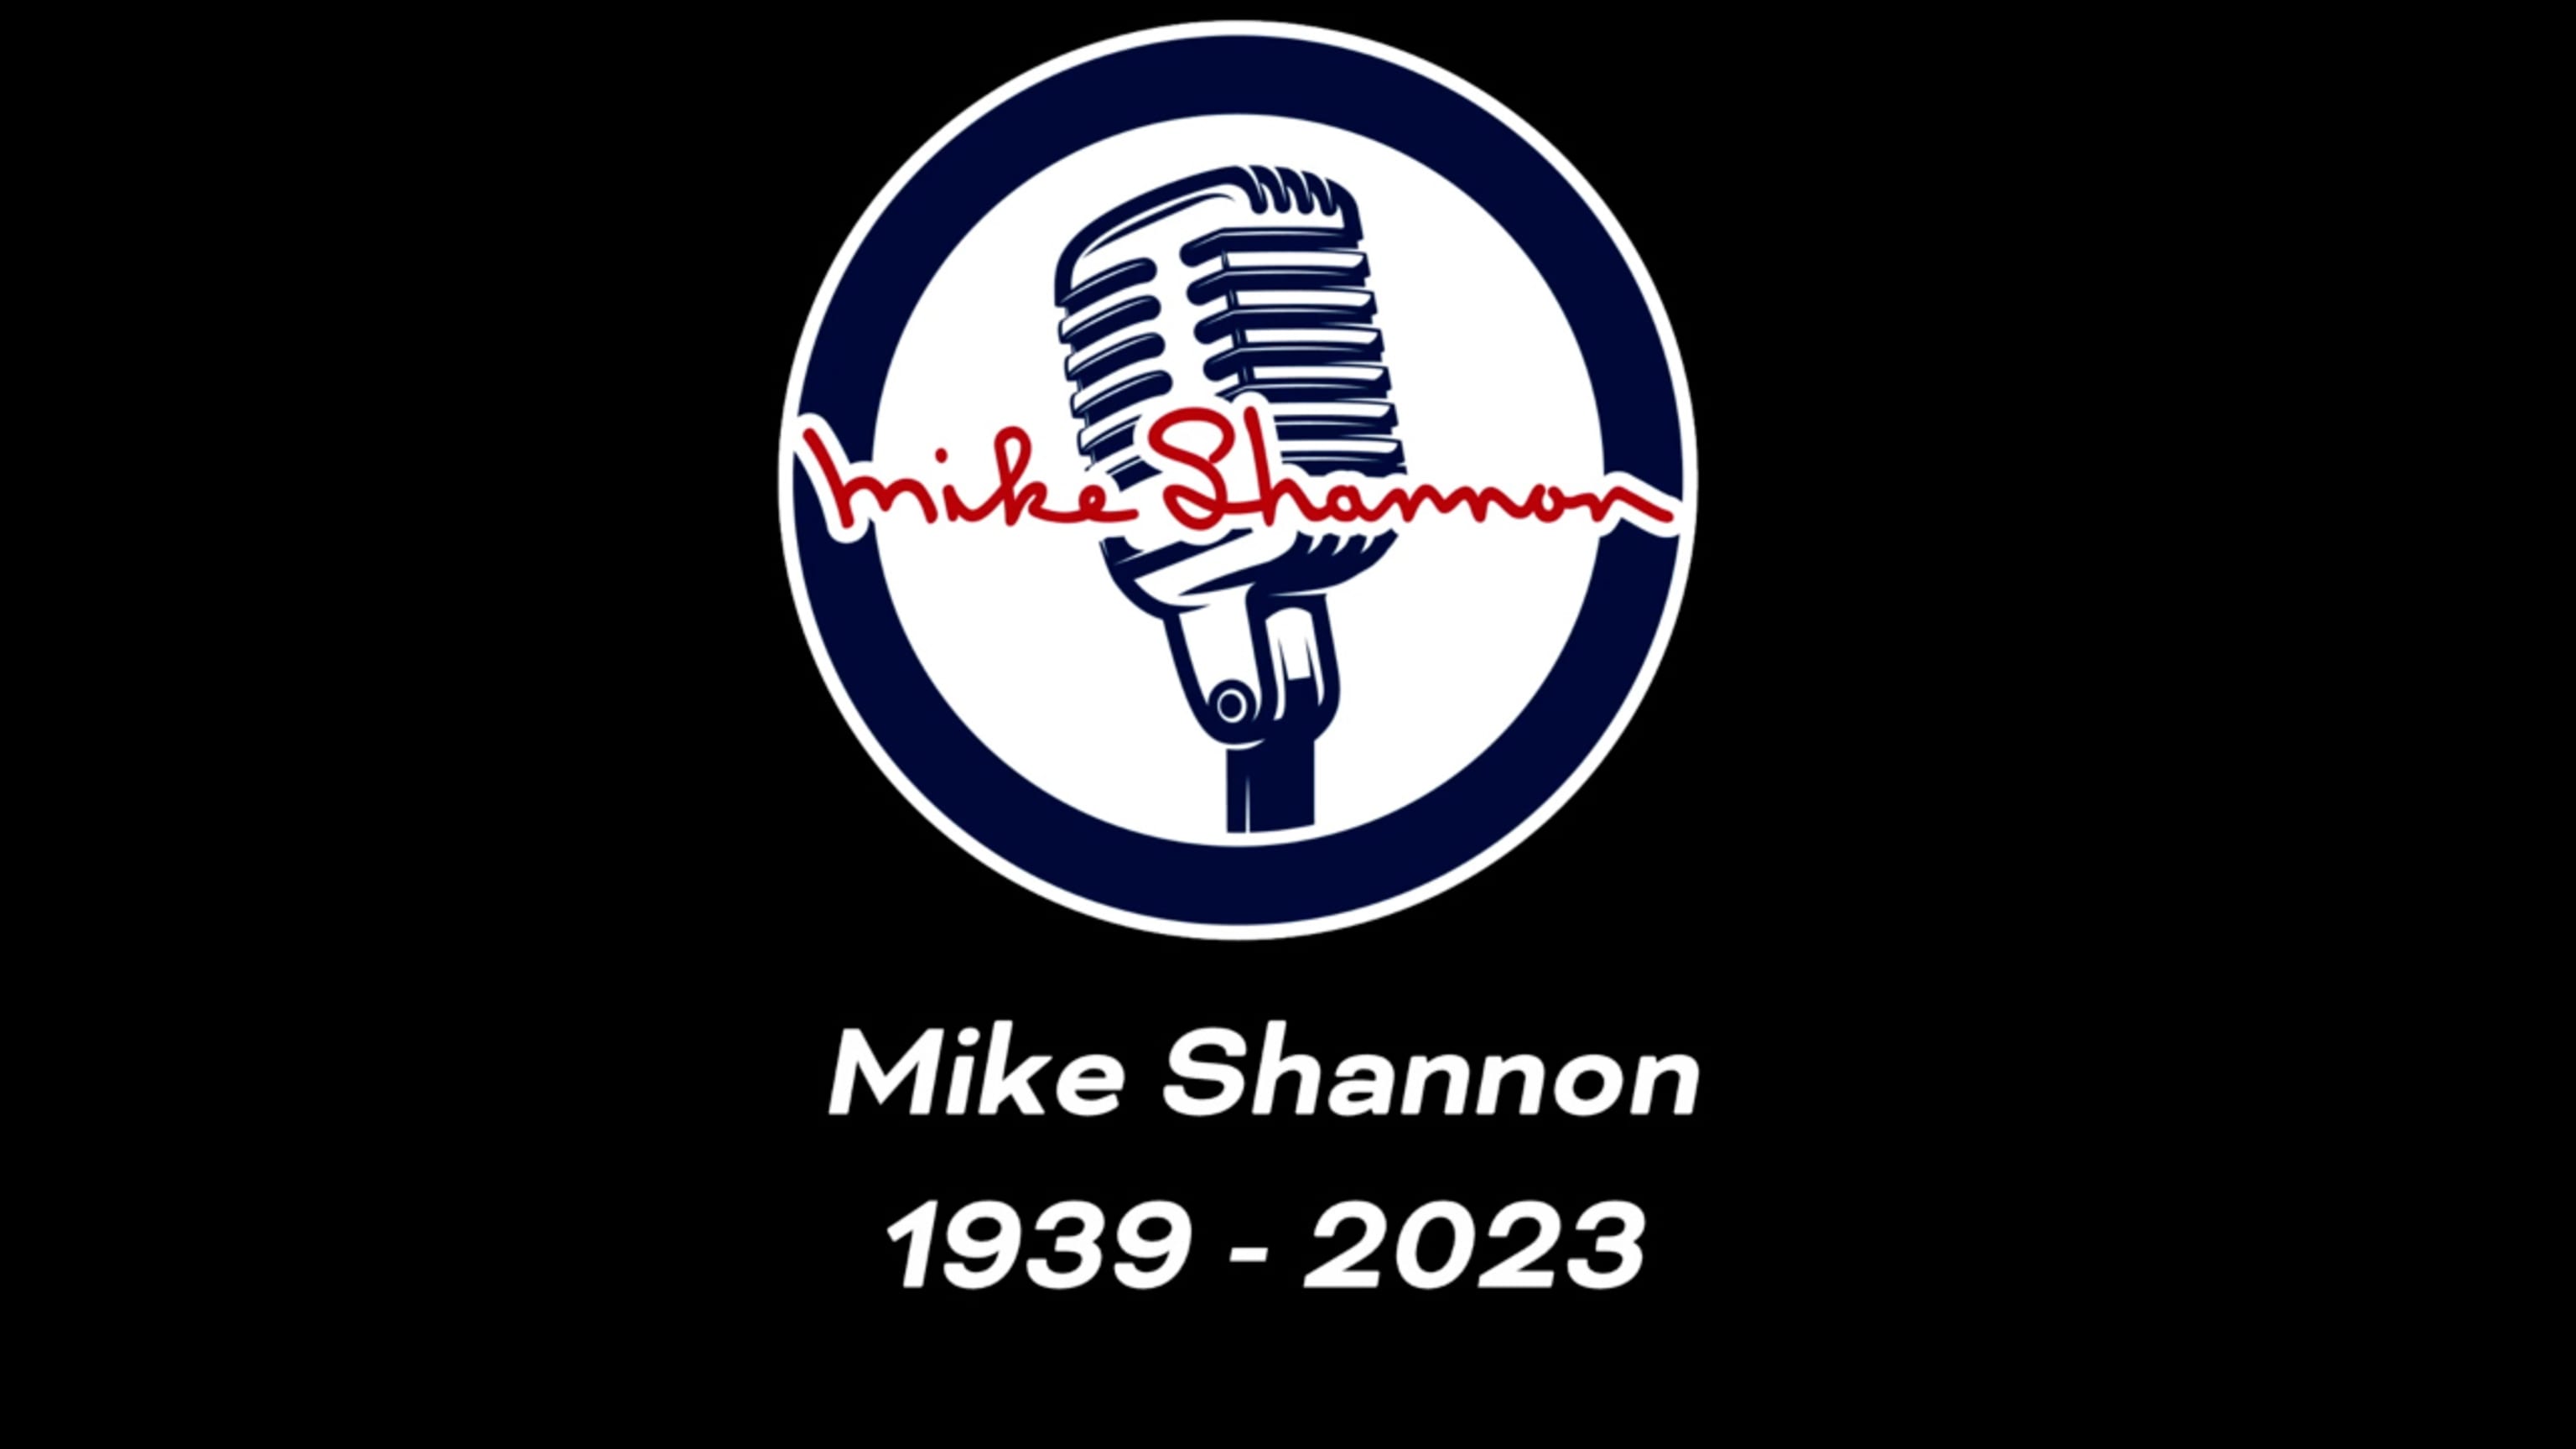 Cardinals Hall of Famer, legendary broadcaster Mike Shannon dies at 83